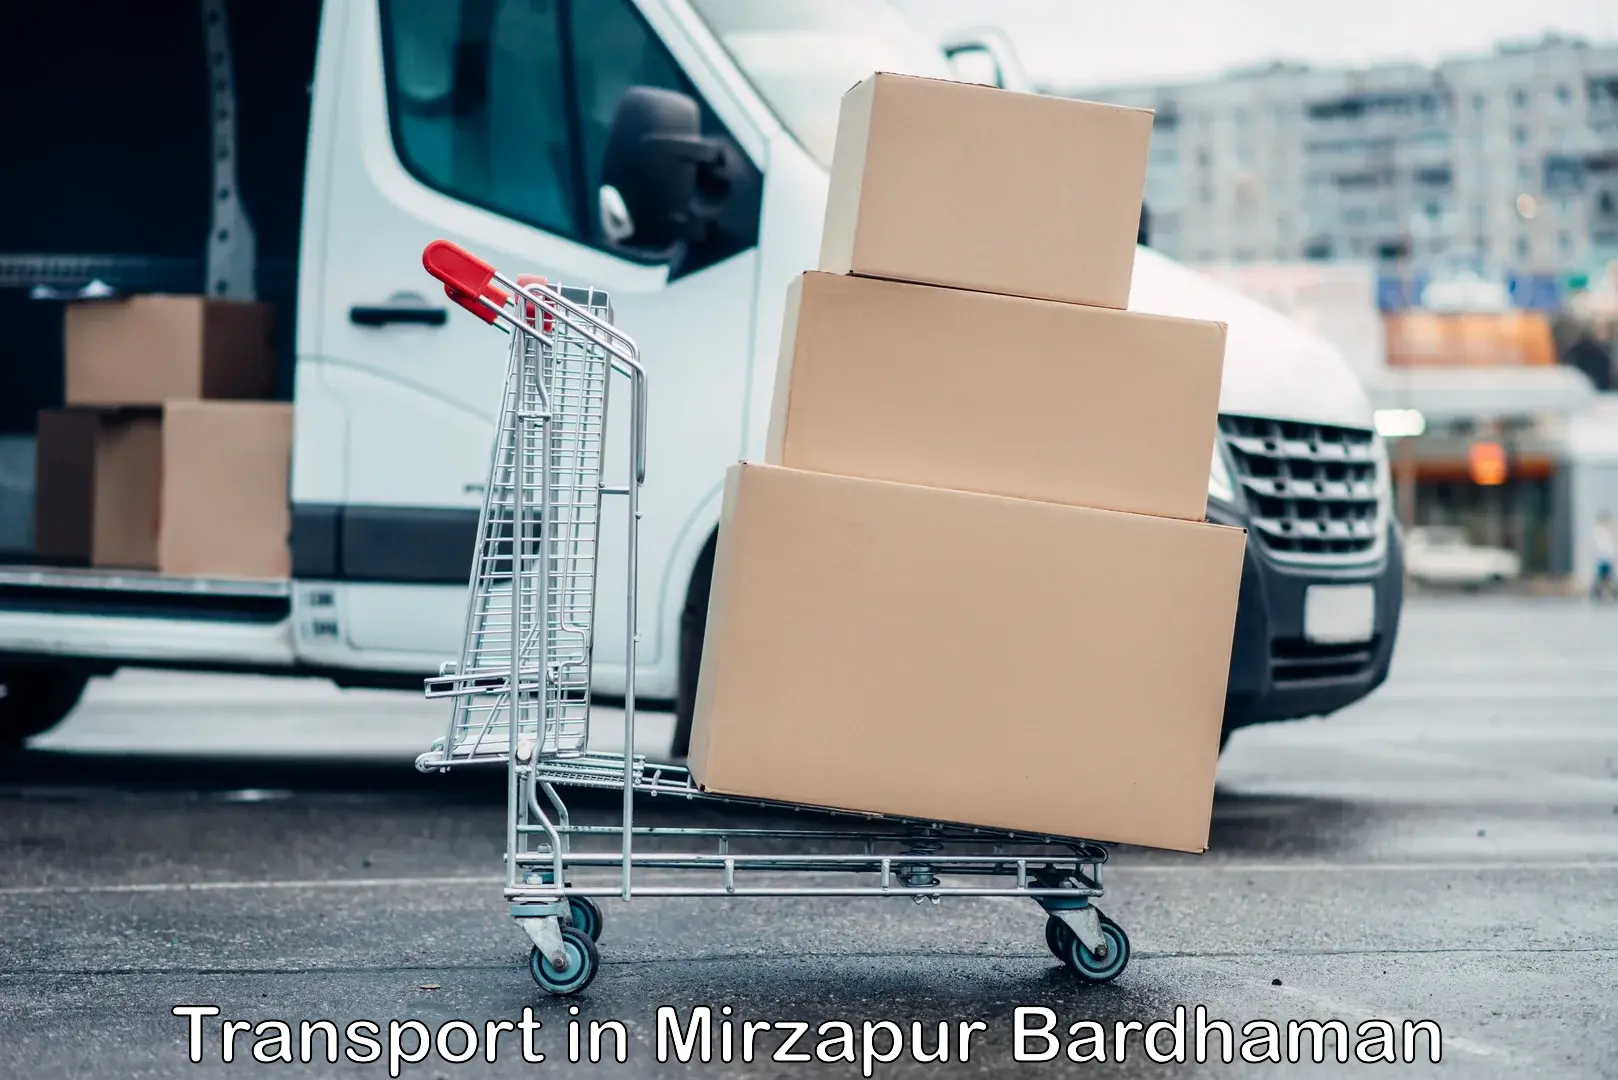 Scooty transport charges in Mirzapur Bardhaman